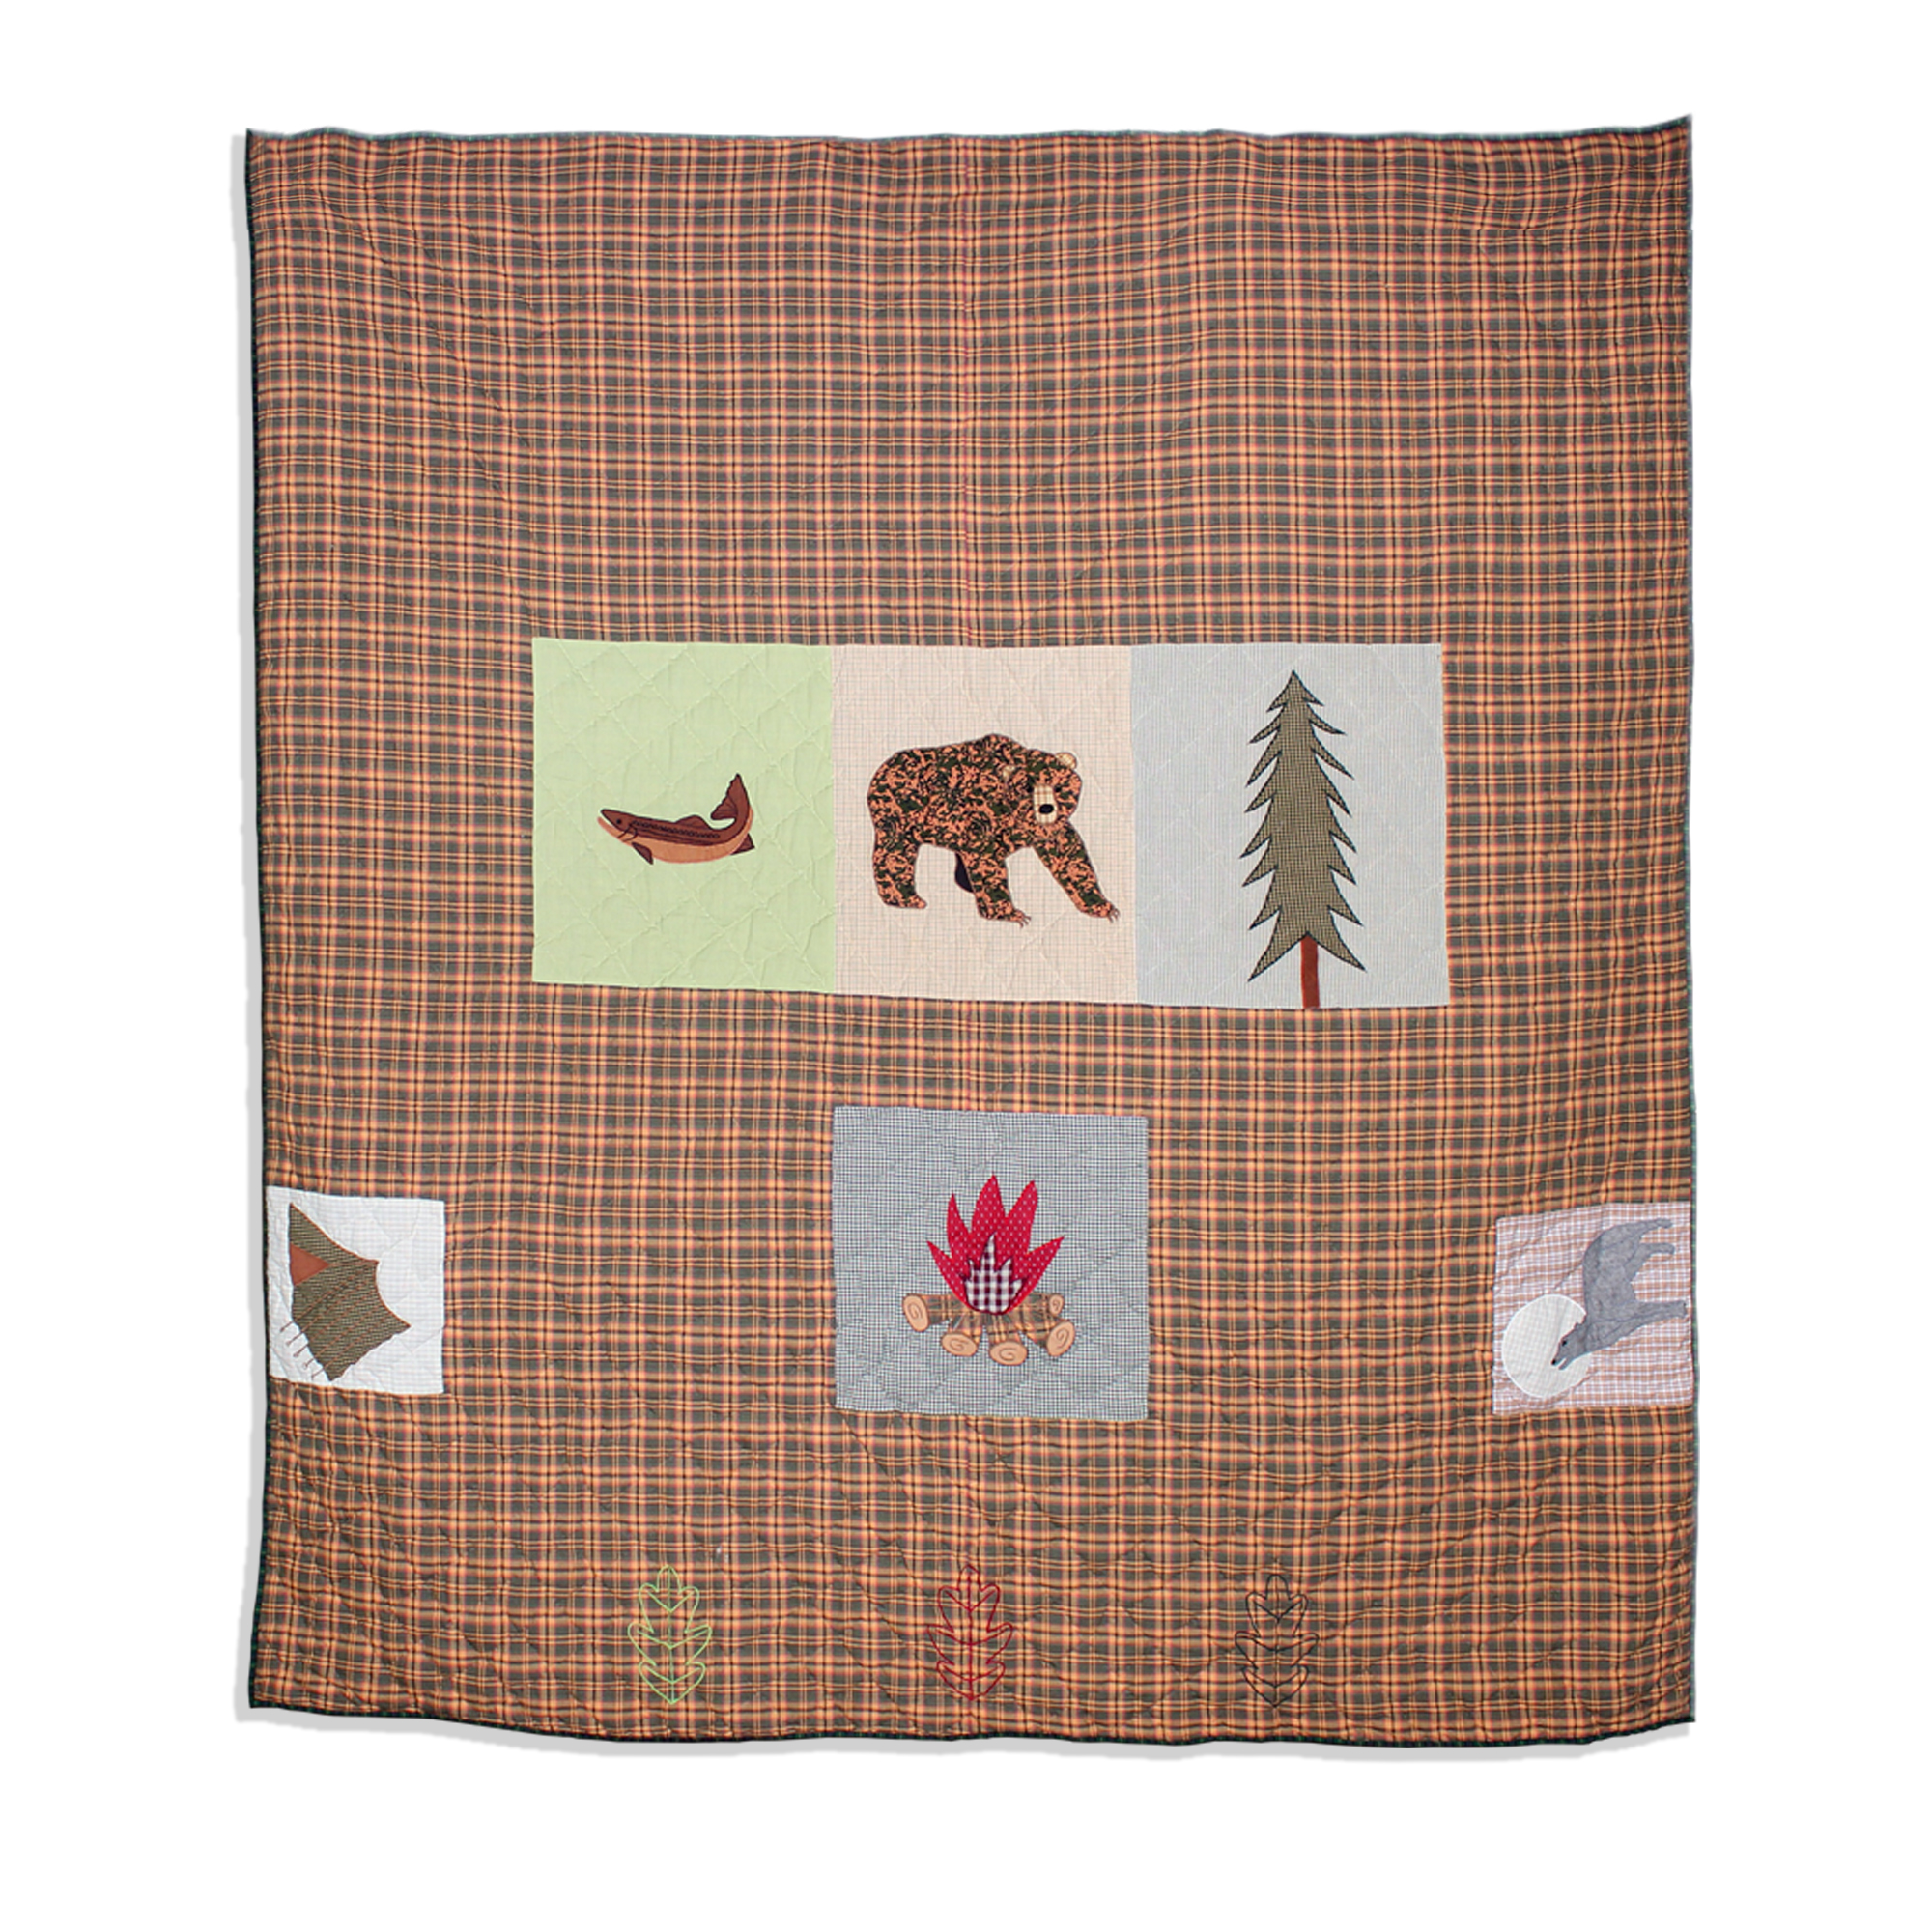 Backwoods Trek, Gold and Brown Plaid Queen Quilt 85"W x 95"L